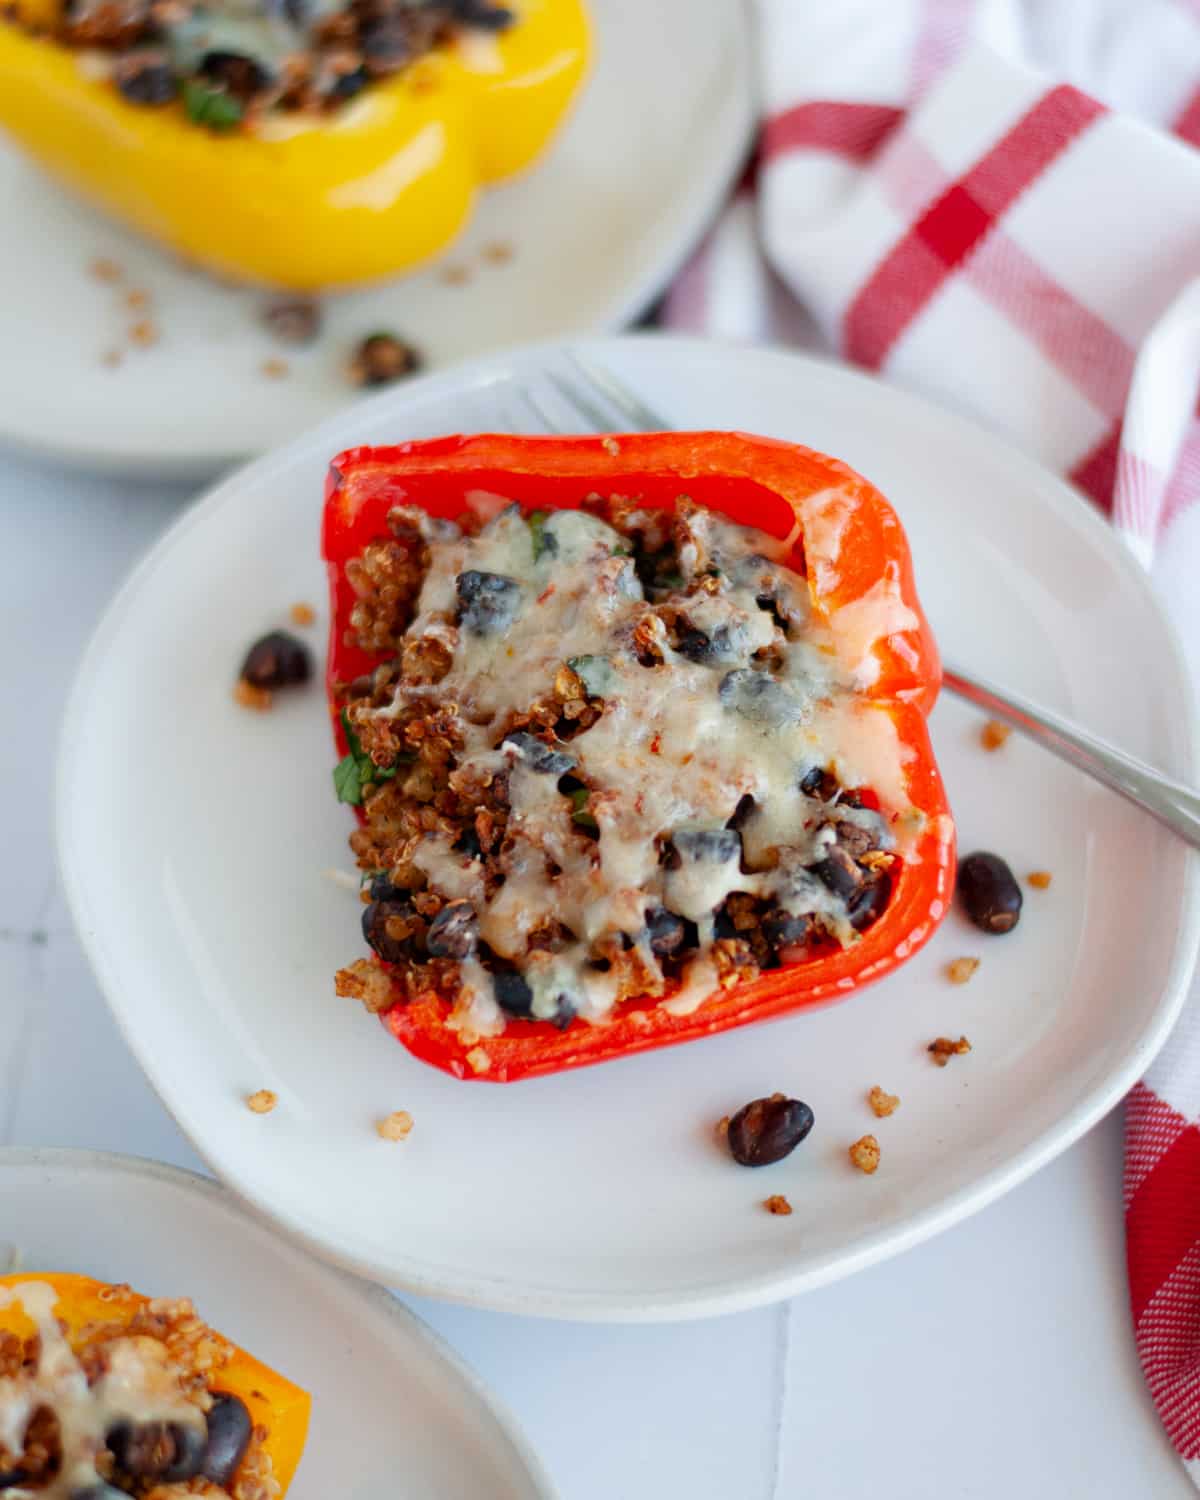 A vegetarian stuffed pepper on a plate ready to eat!